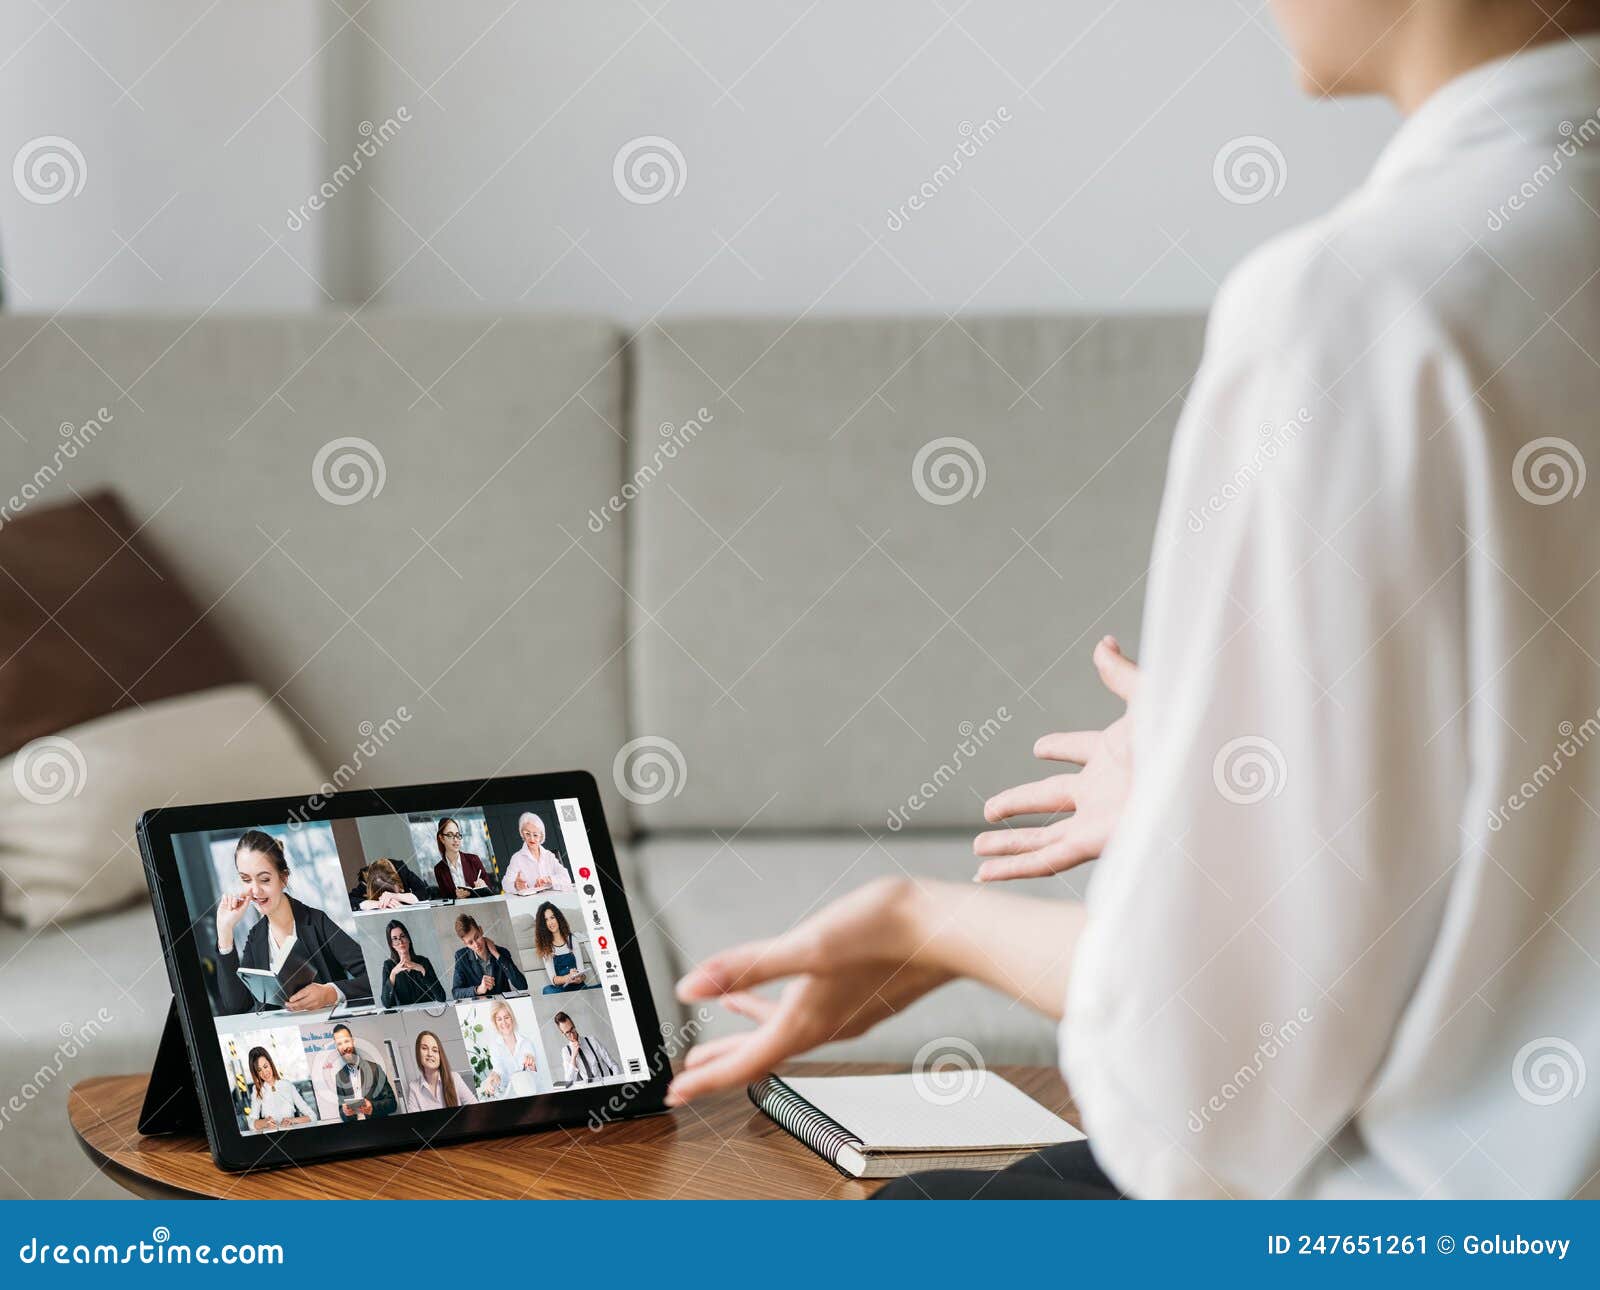 Video Conference Remote Business Team Home Office Stock Image pic picture